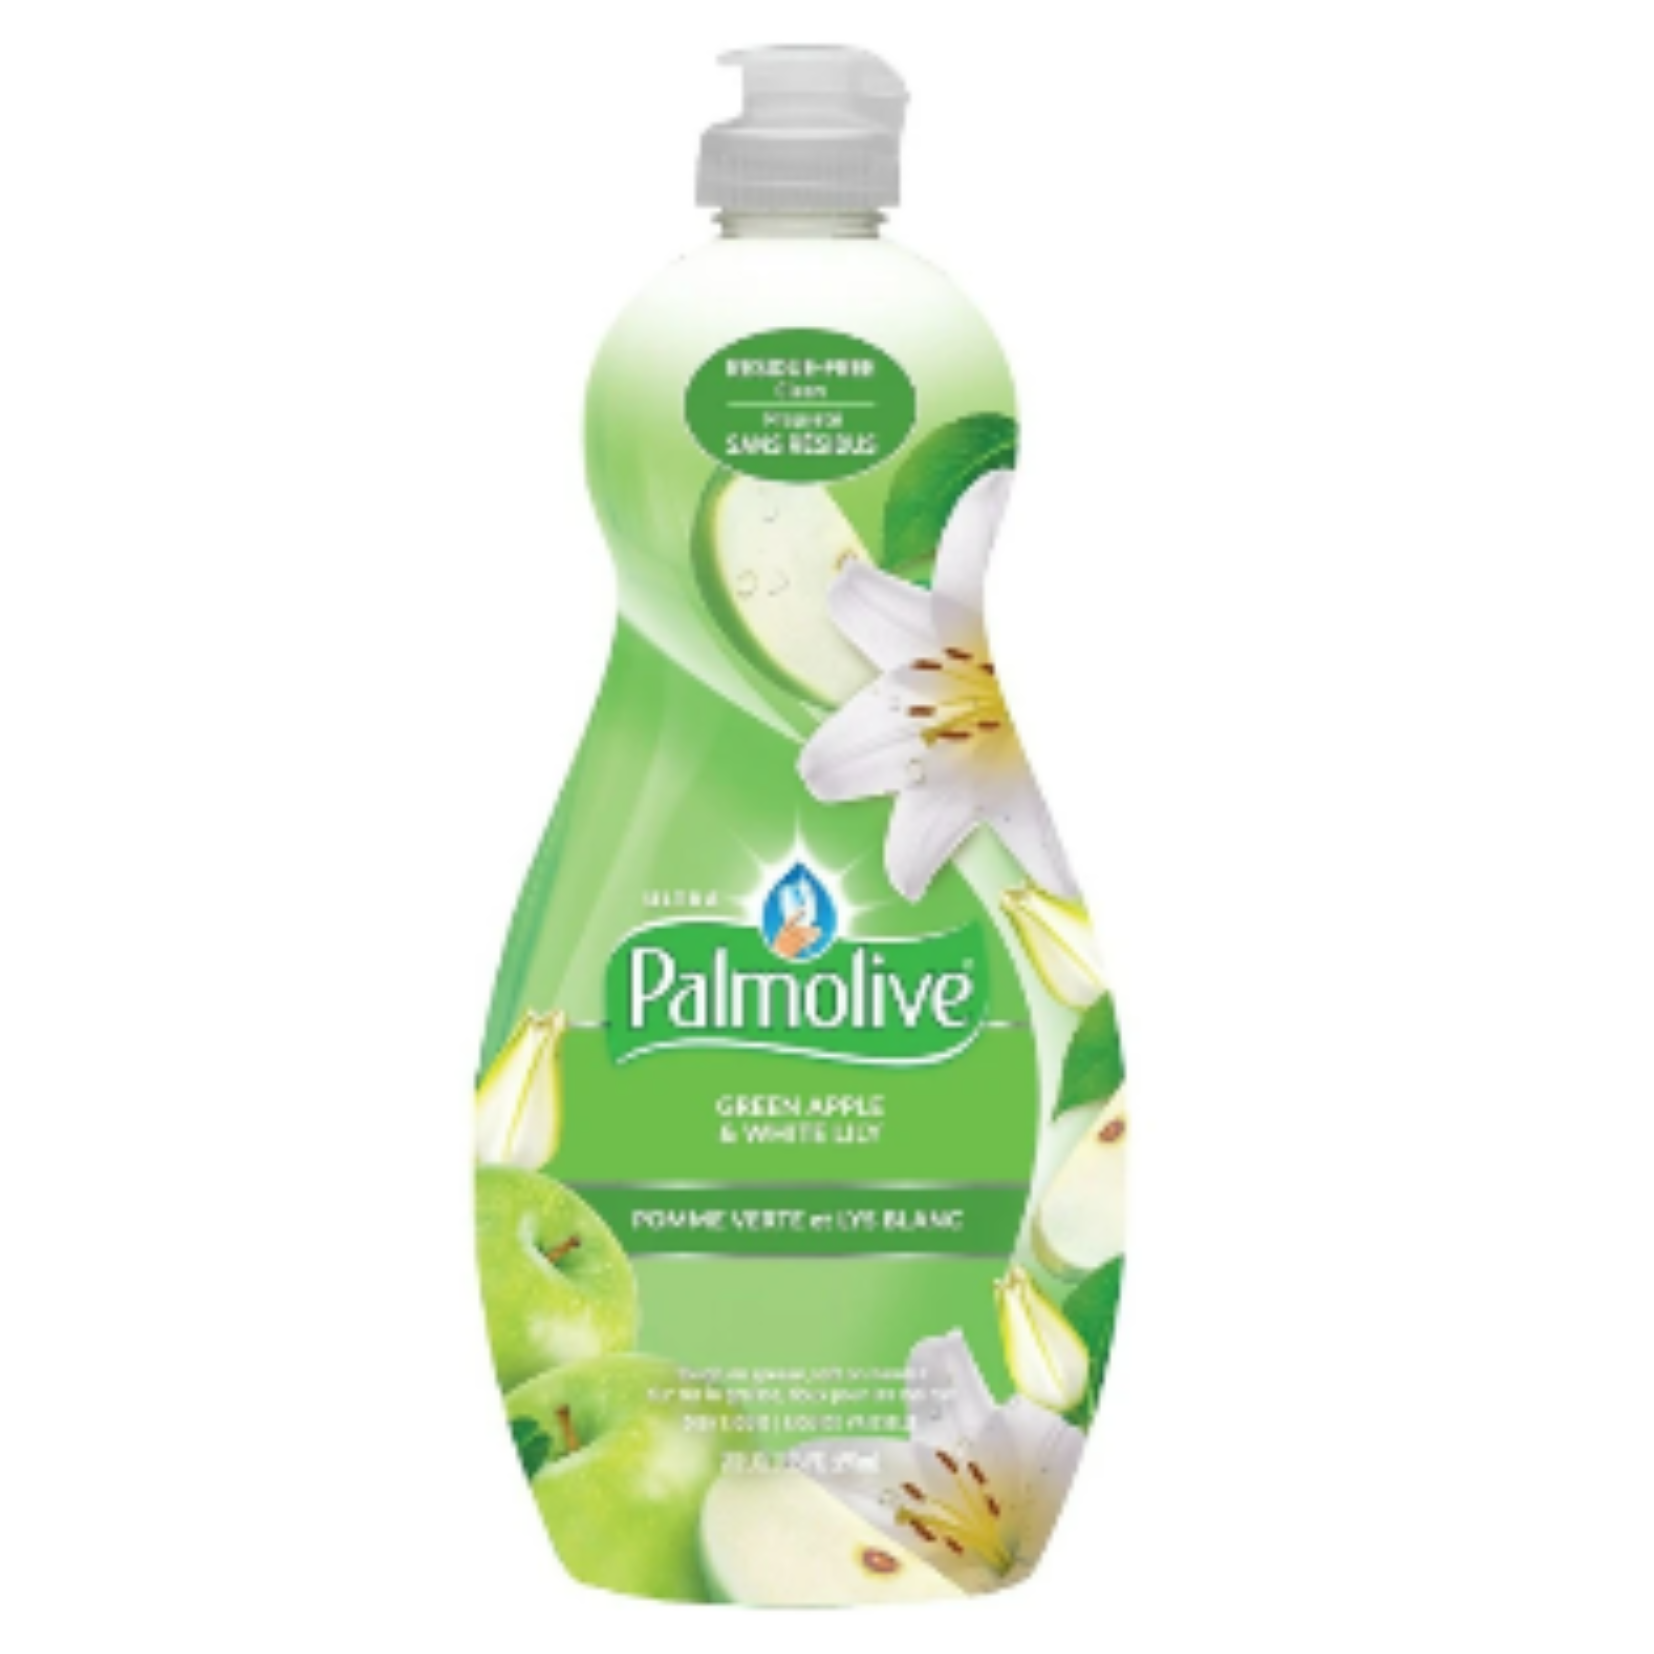 Palmolive Green Apple And White Lily Dish Soap 591ml